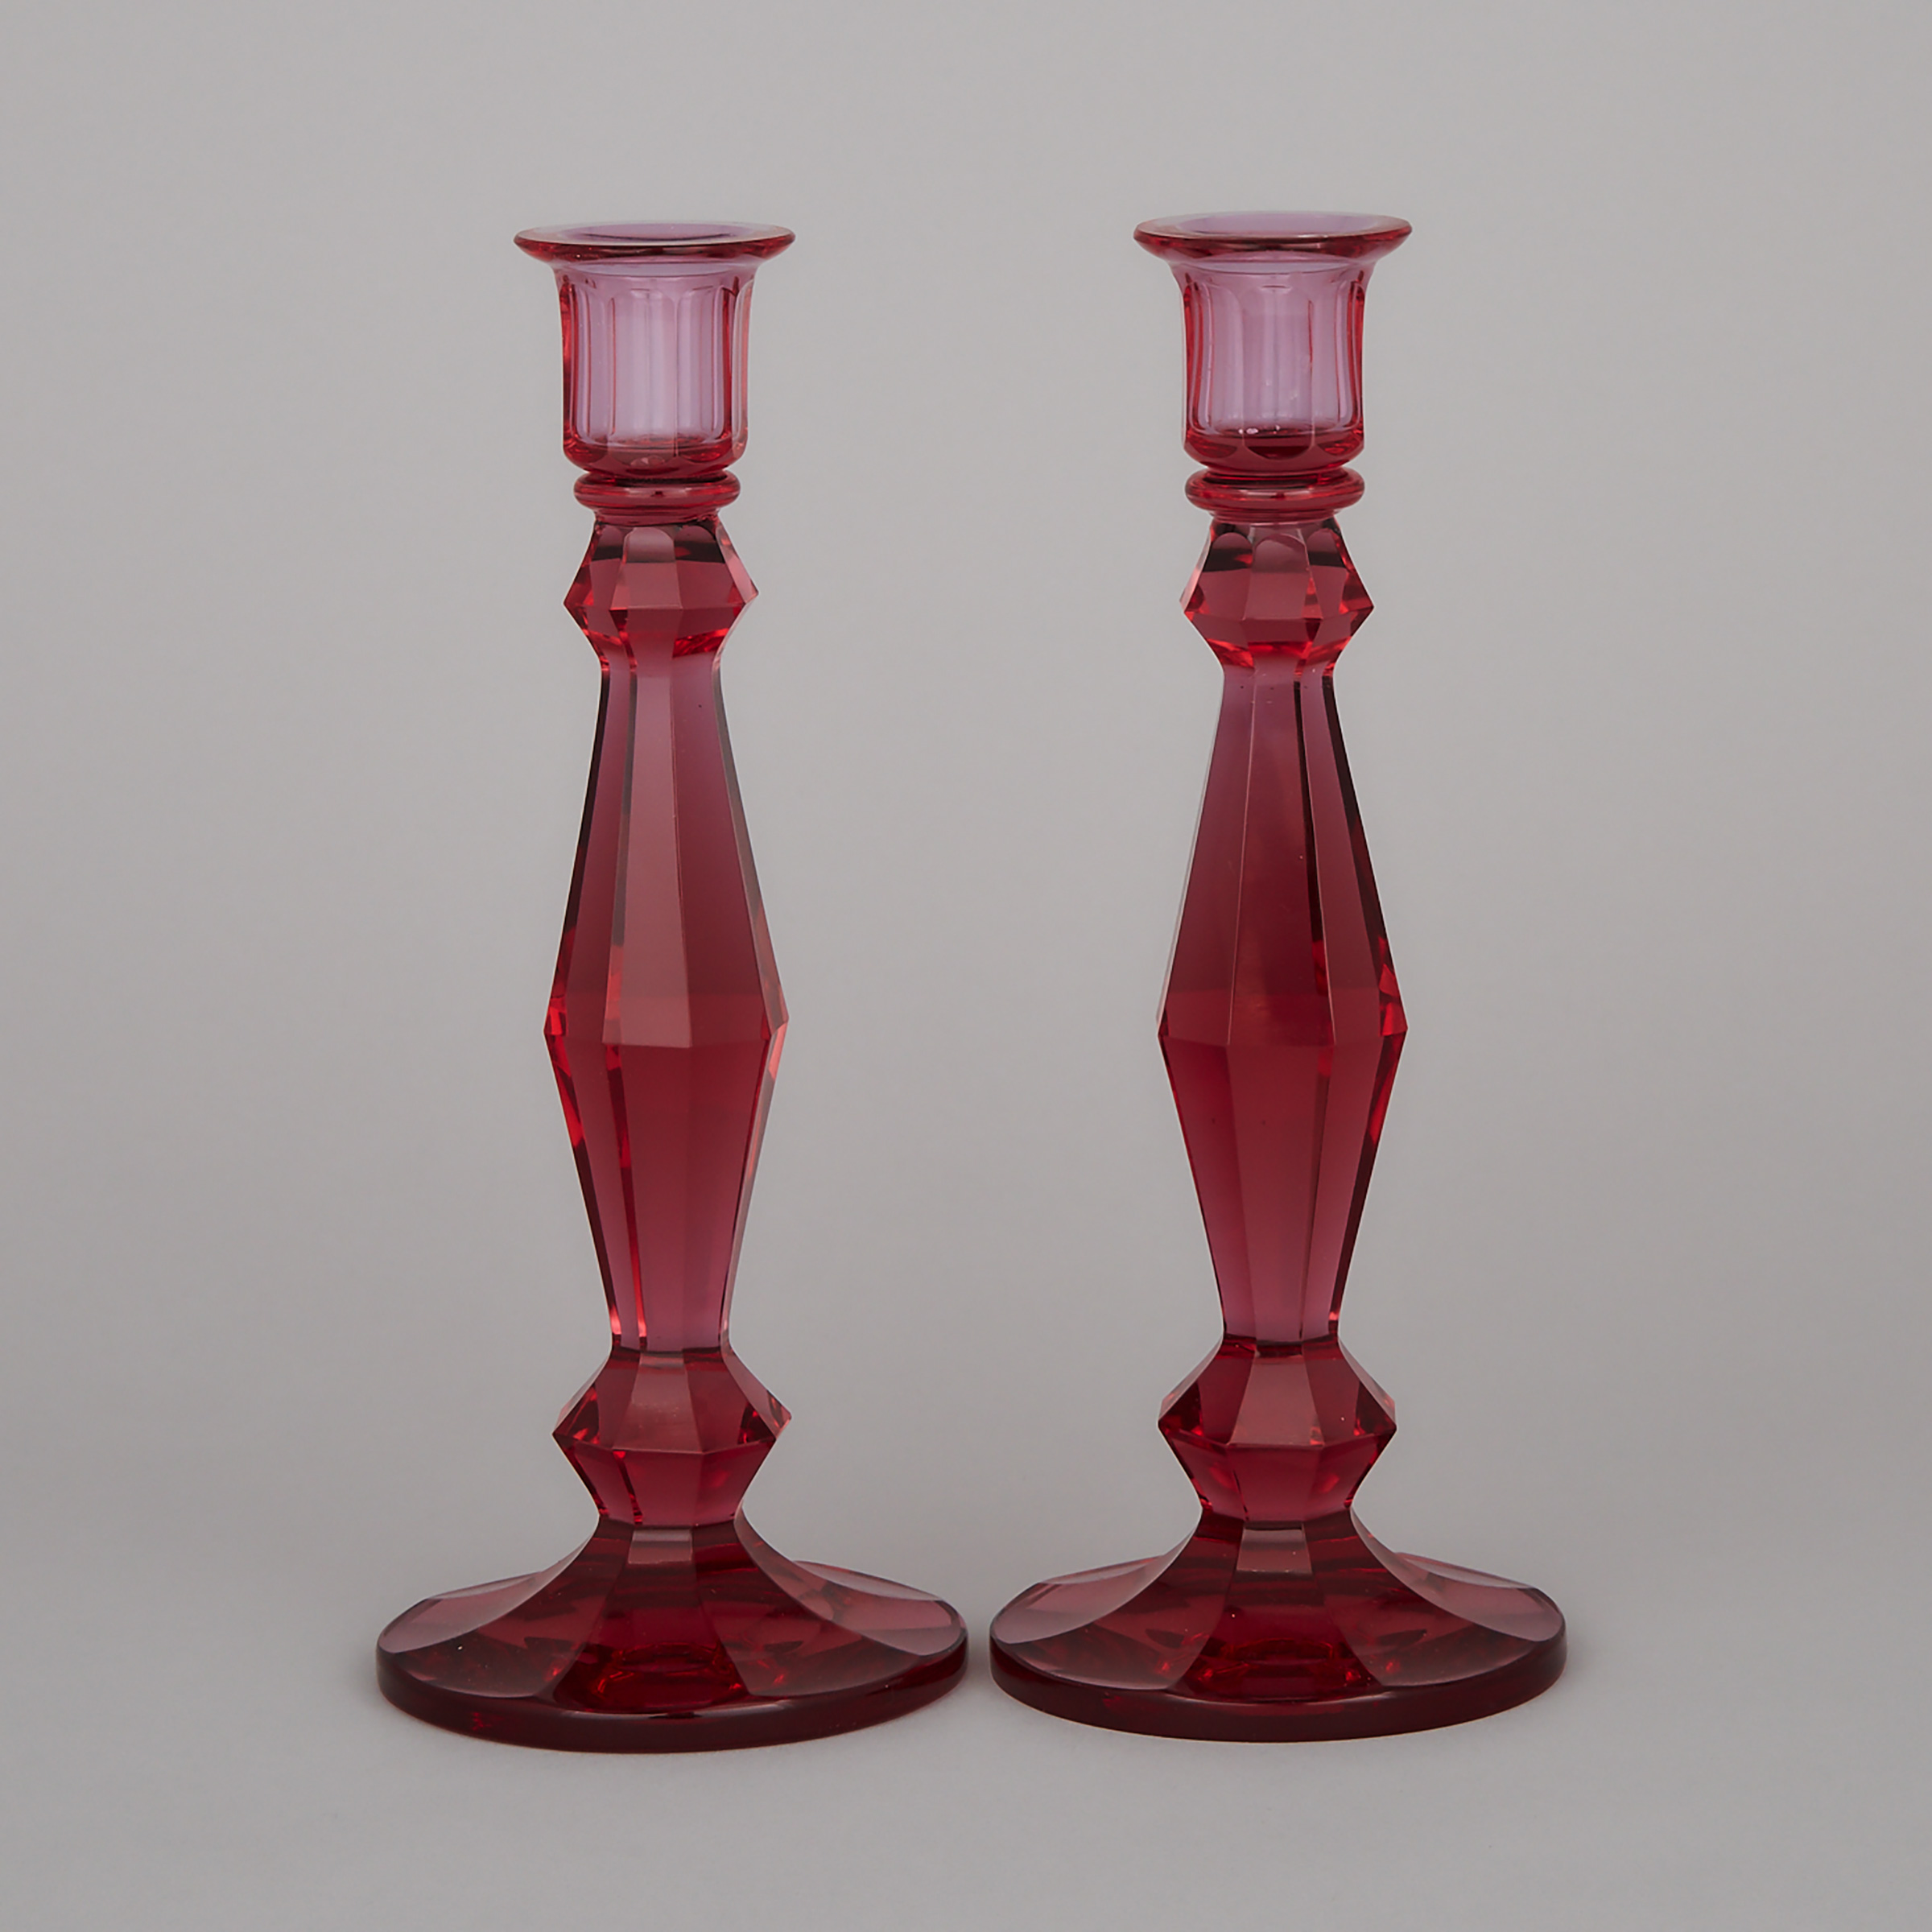 Pair of Moser 'Royalit' Cut Amethyst Glass Table Candlesticks, 20th century